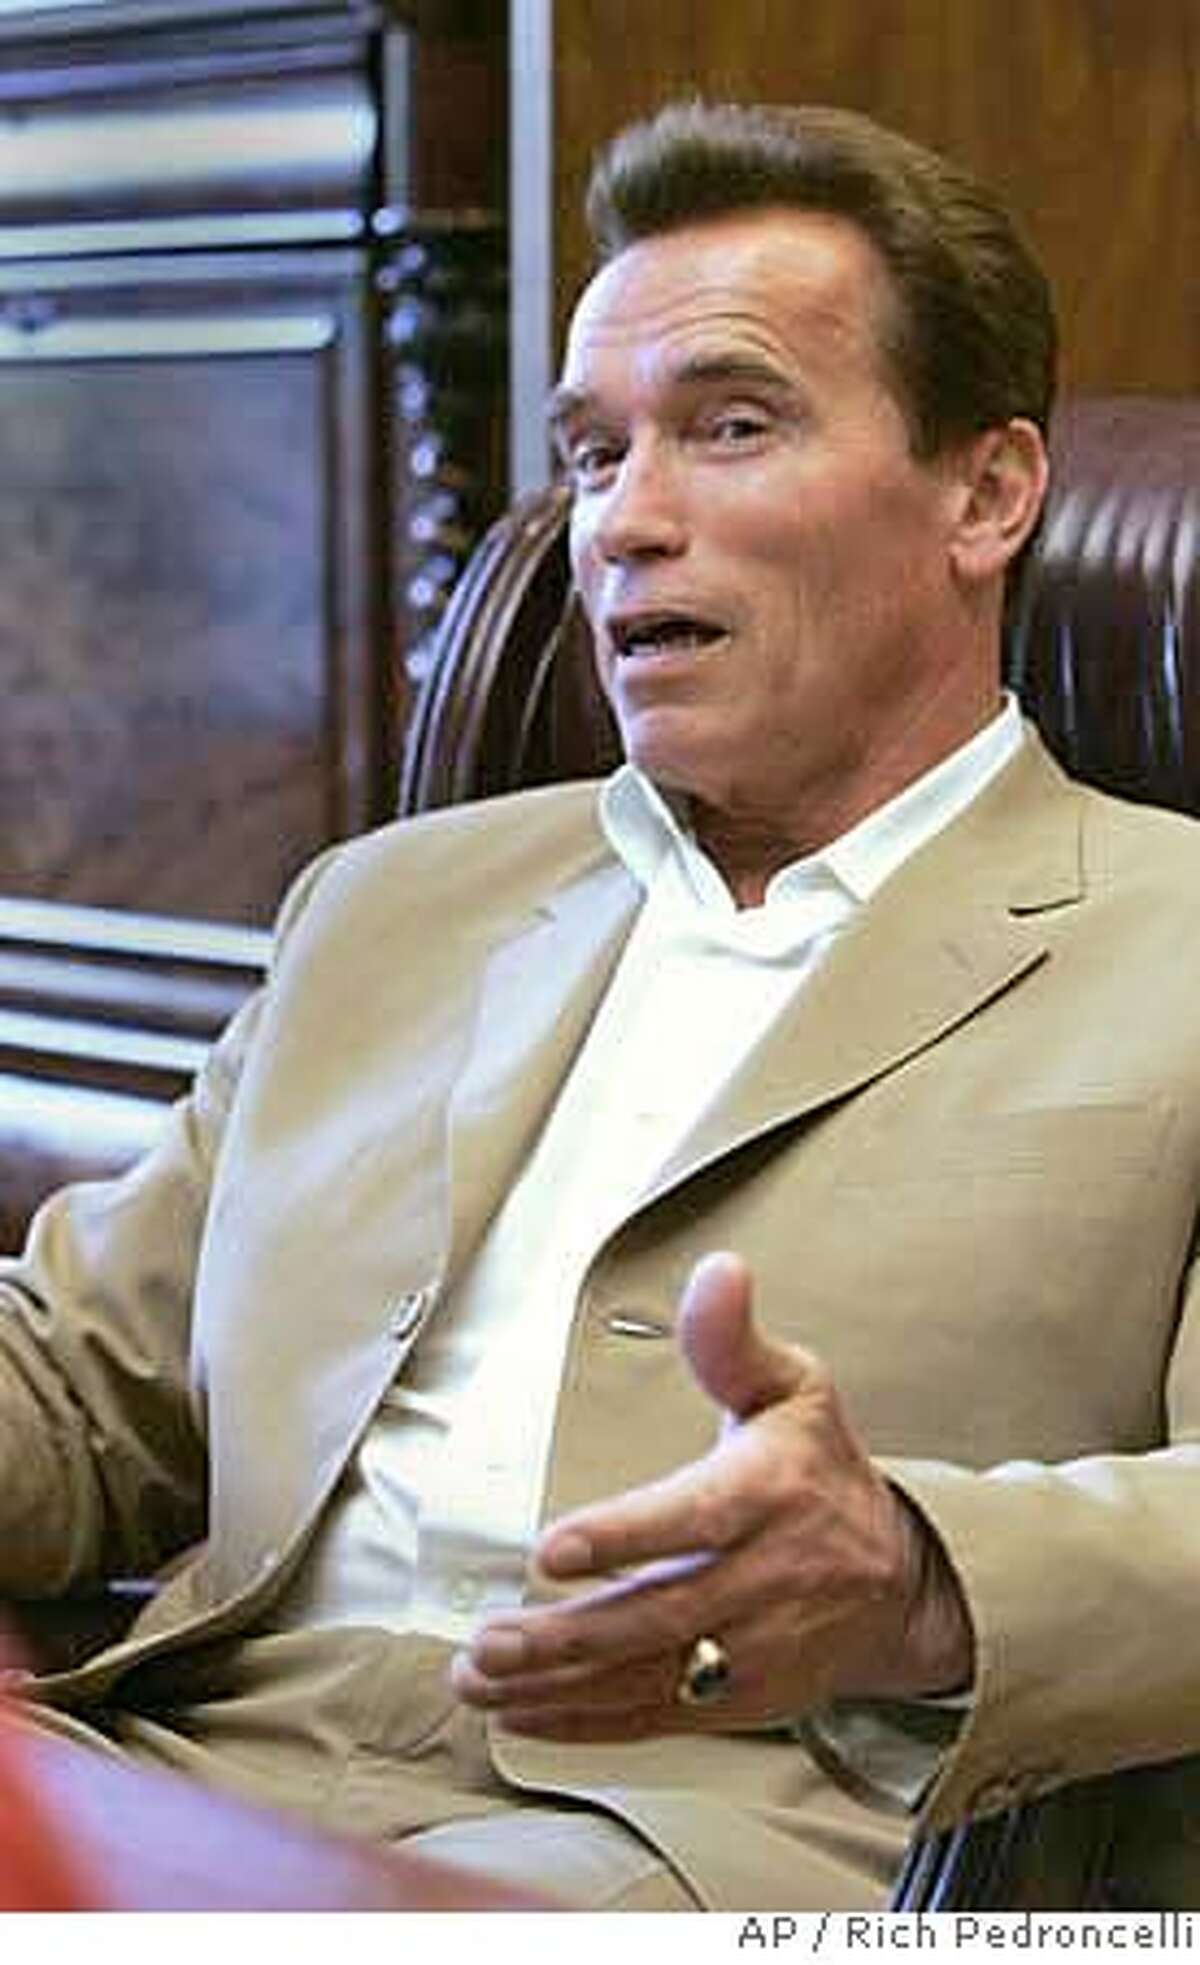 ###Live Caption:Gov. Arnold Schwarzenegger responds to a question during an interview with the Associated Press, in his Capitol office in Sacramento, Calif., Tuesday, April 29, 2008.(AP Photo/Rich Pedroncelli)###Caption History:Gov. Arnold Schwarzenegger responds to a question during an interview with the Associated Press, in his Capitol office in Sacramento, Calif., Tuesday, April 29, 2008.(AP Photo/Rich Pedroncelli)###Notes:###Special Instructions: